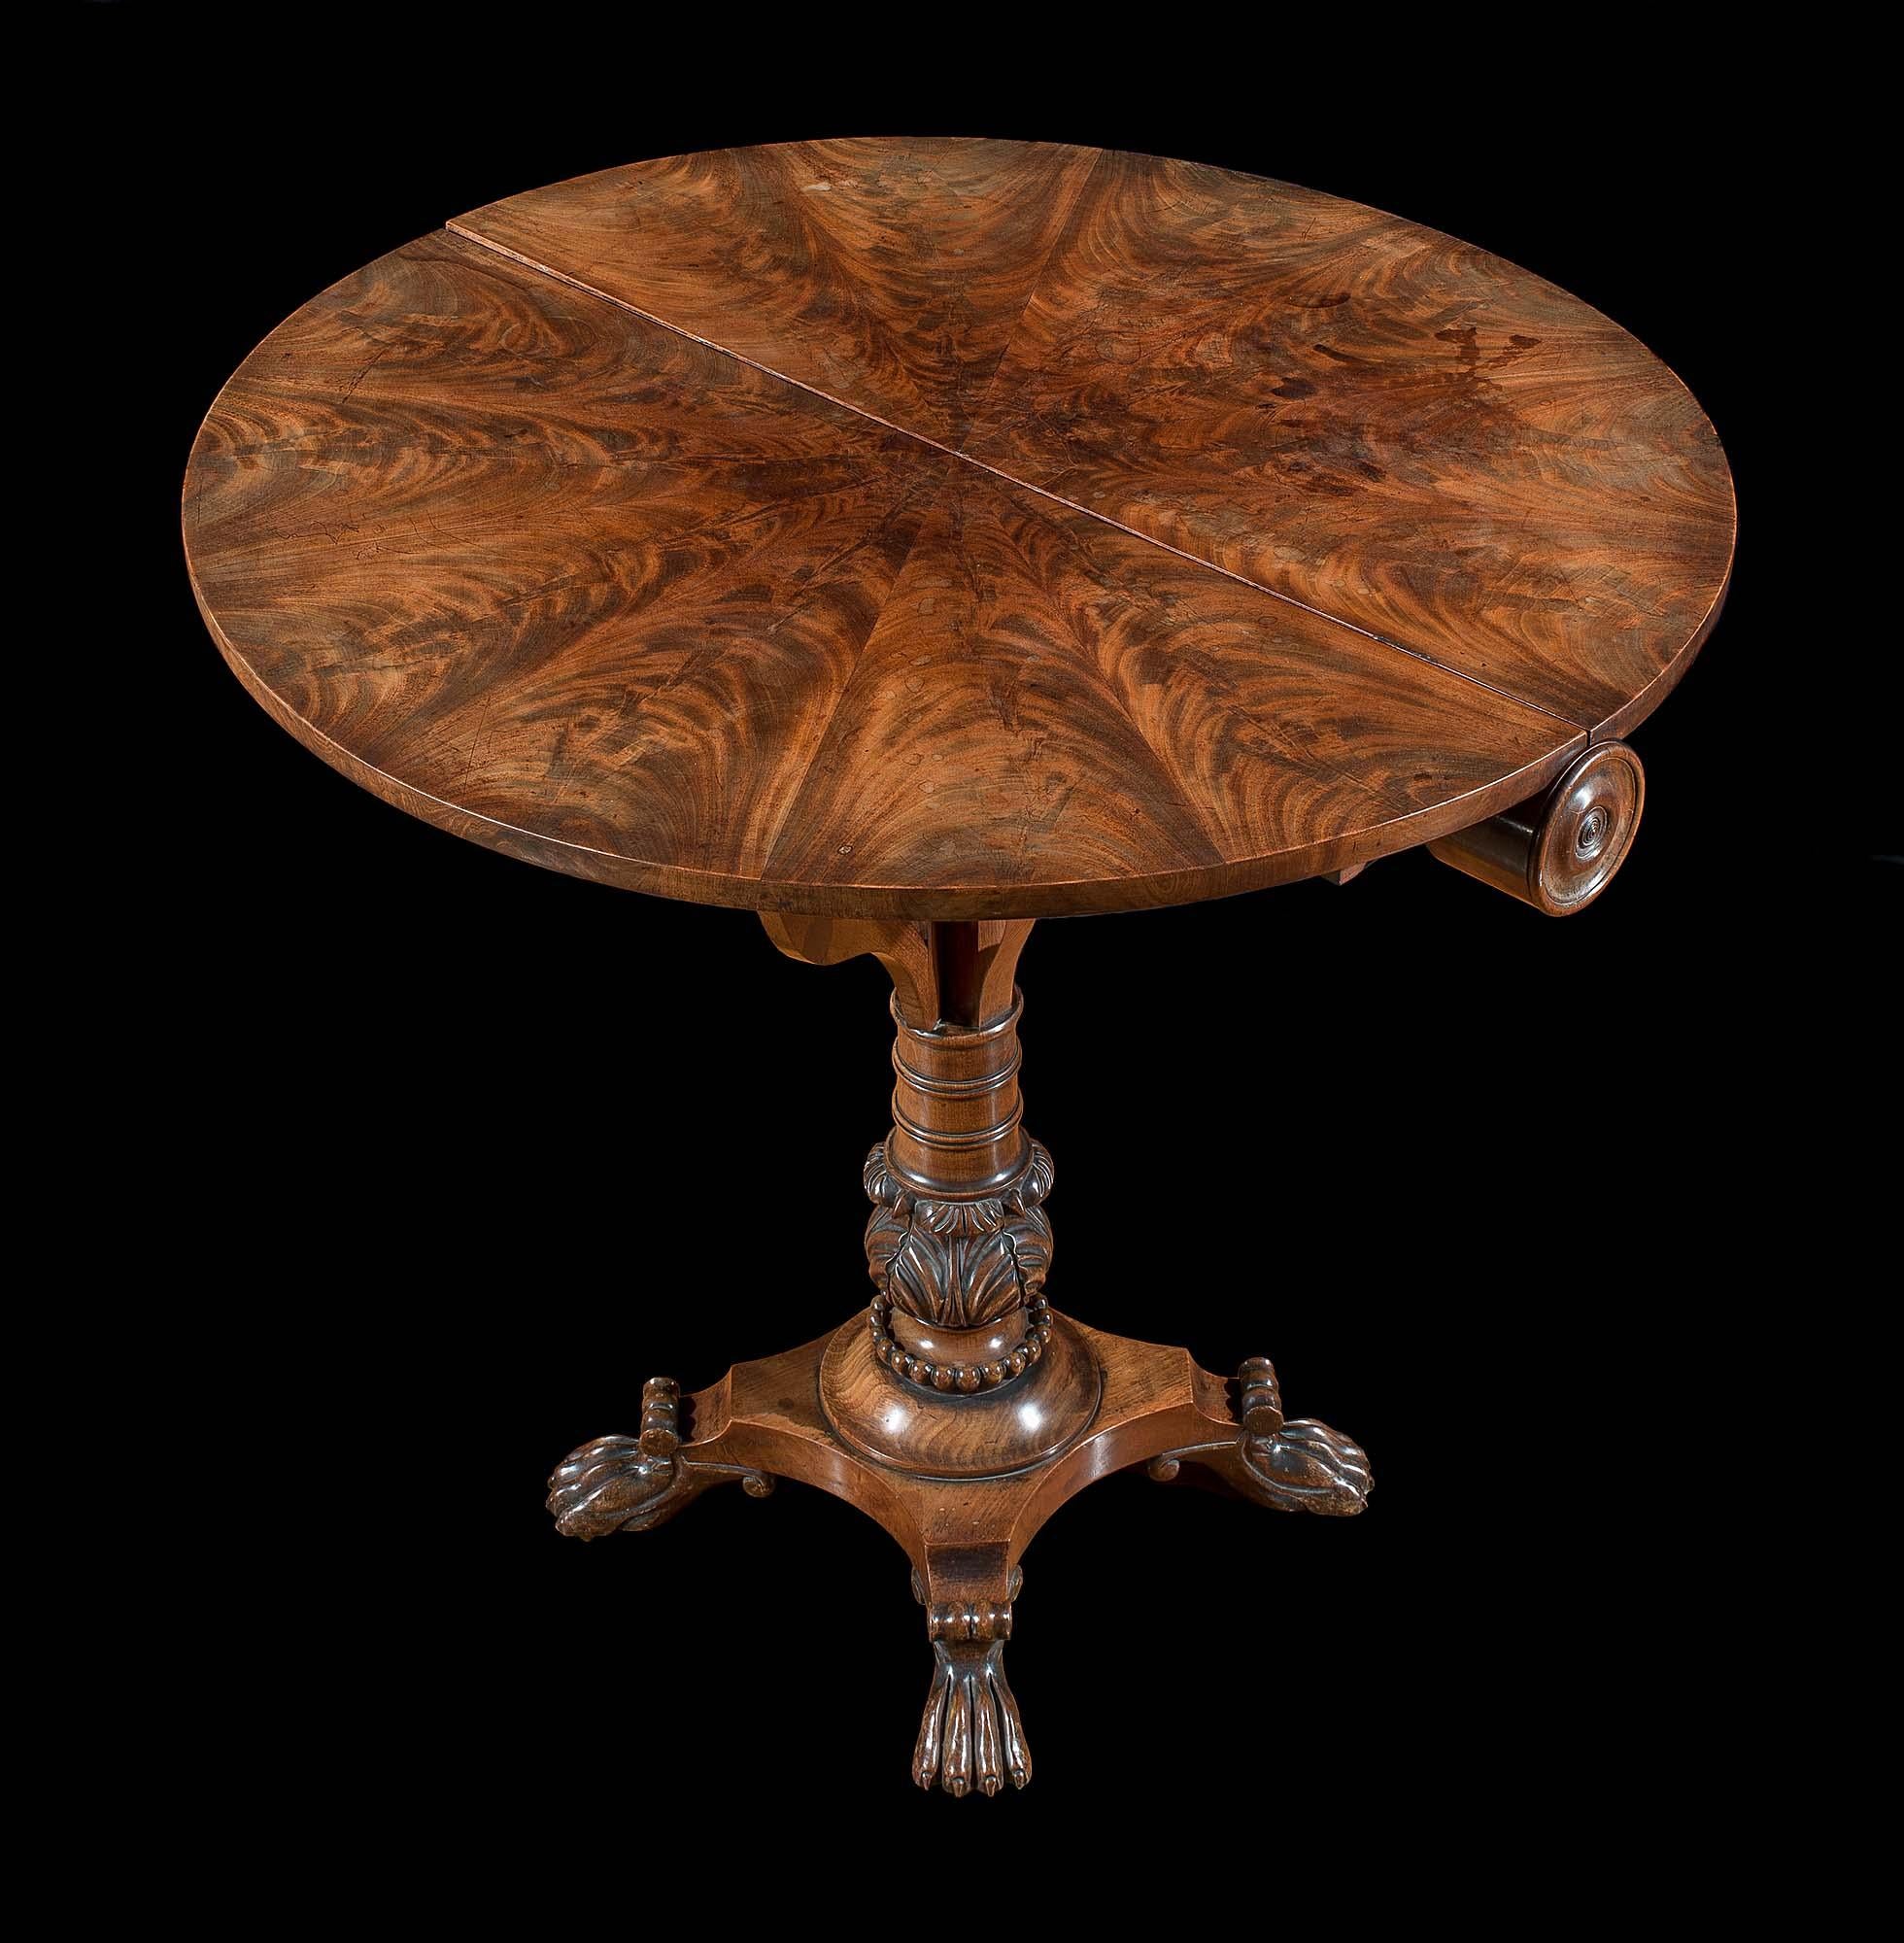 An early 19th century flame mahogany Regency drop-leaf Sutherland table in the manner of Thomas Hope.
The top is veneered in book matched plain mahogany. The turned central baluster pedestal, heavily carved with acanthus detail, is supported on